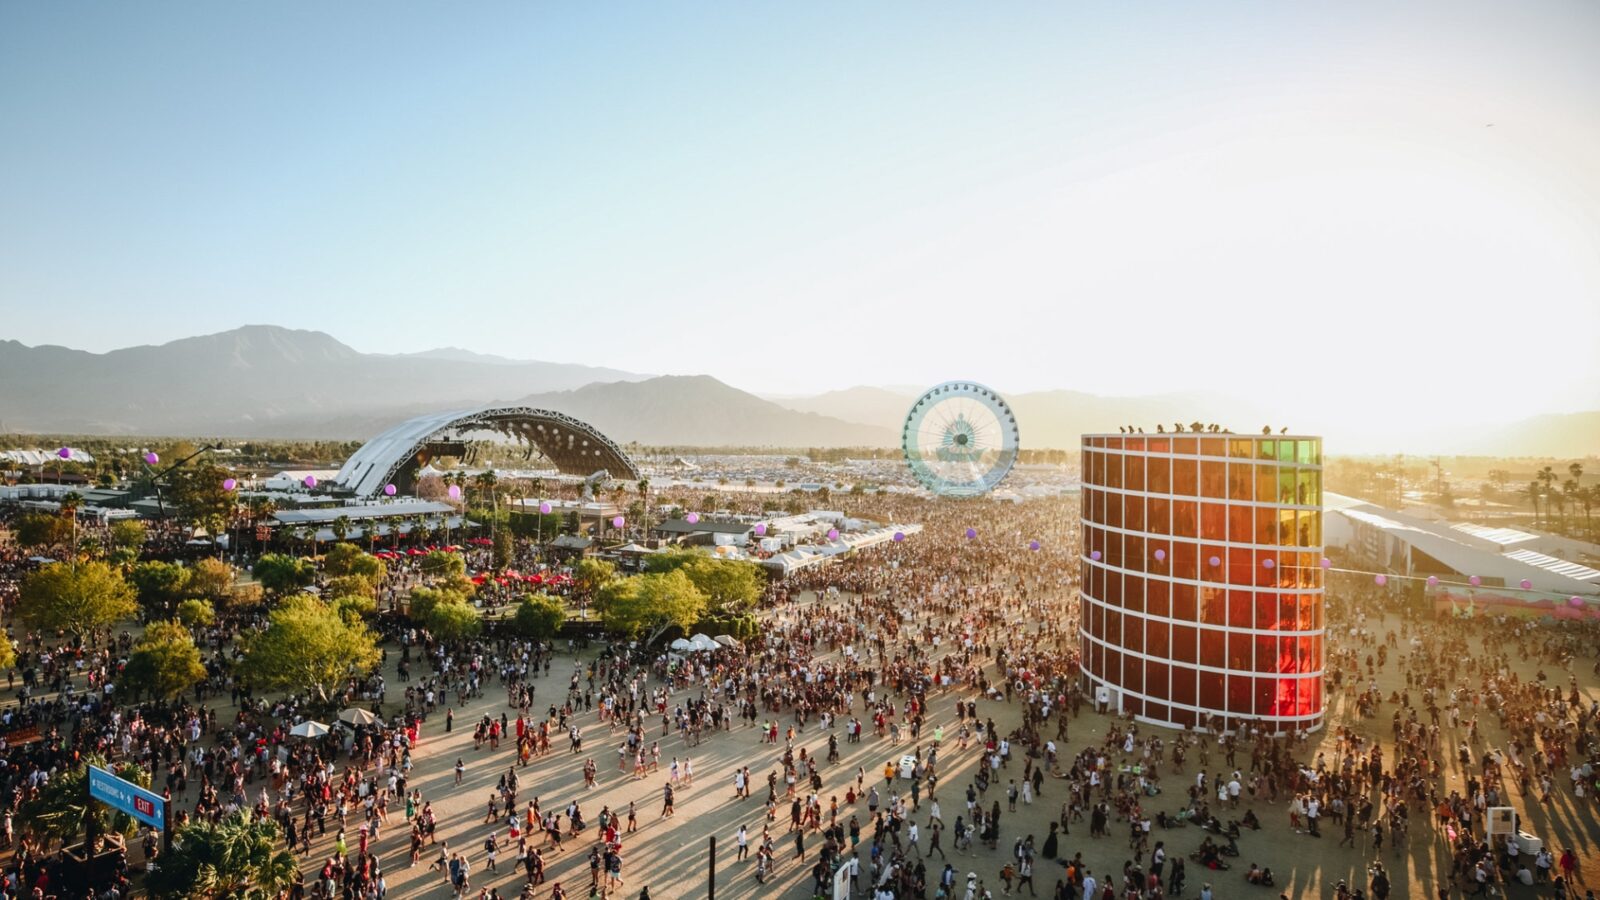 OpenSea and Coachella to Launch Unique NFT Collections